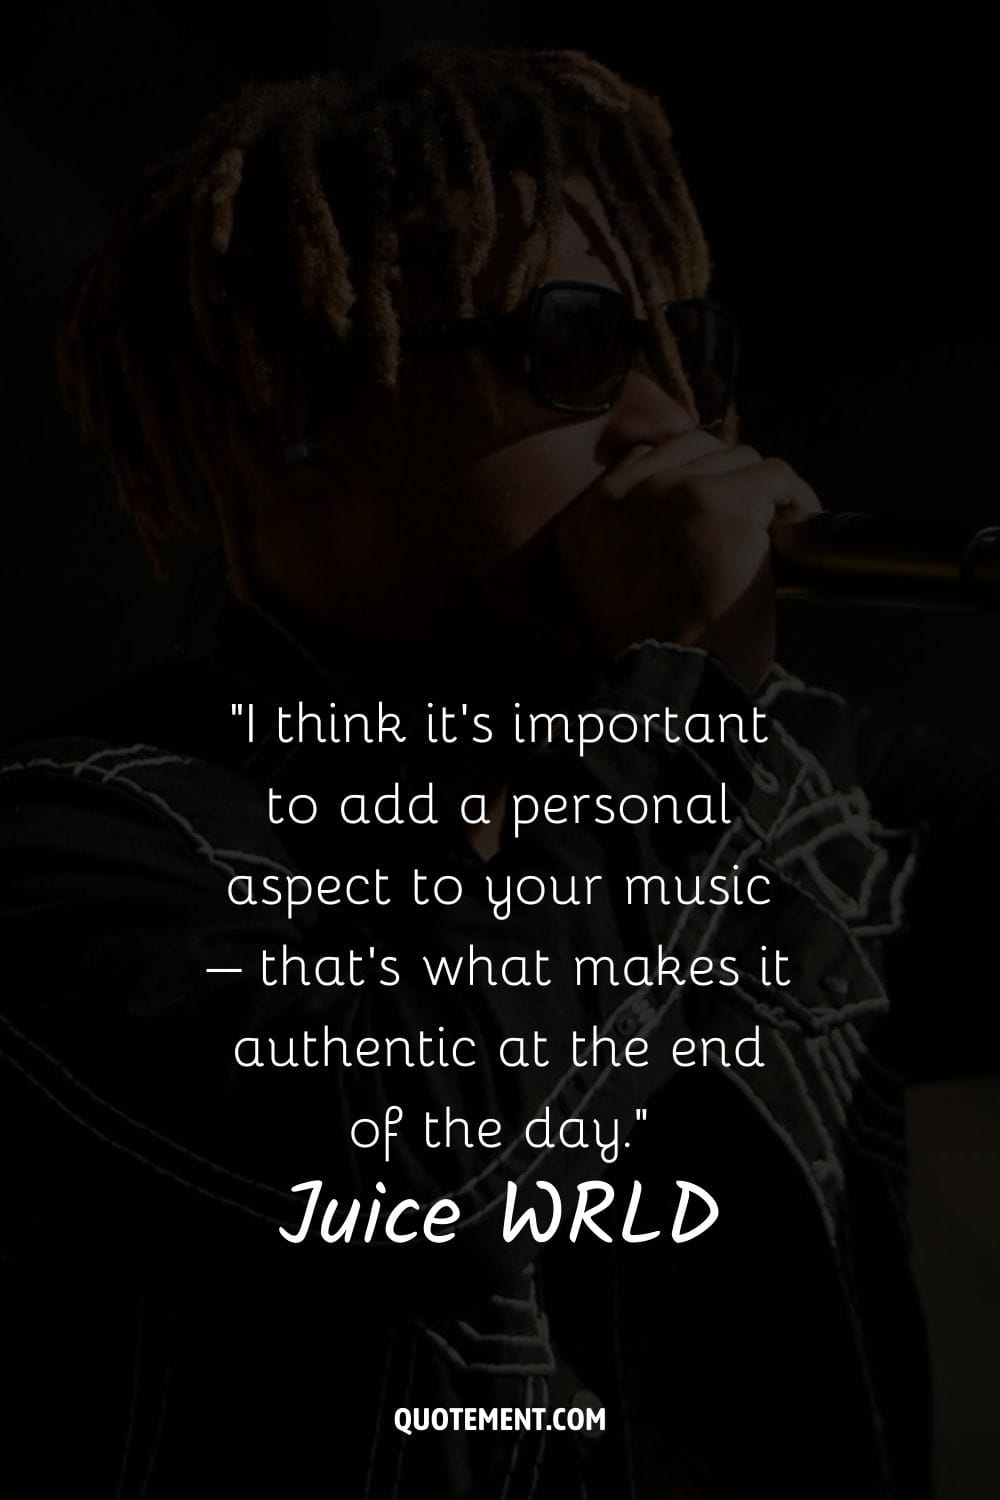 I think it’s important to add a personal aspect to your music – that’s what makes it authentic at the end of the day